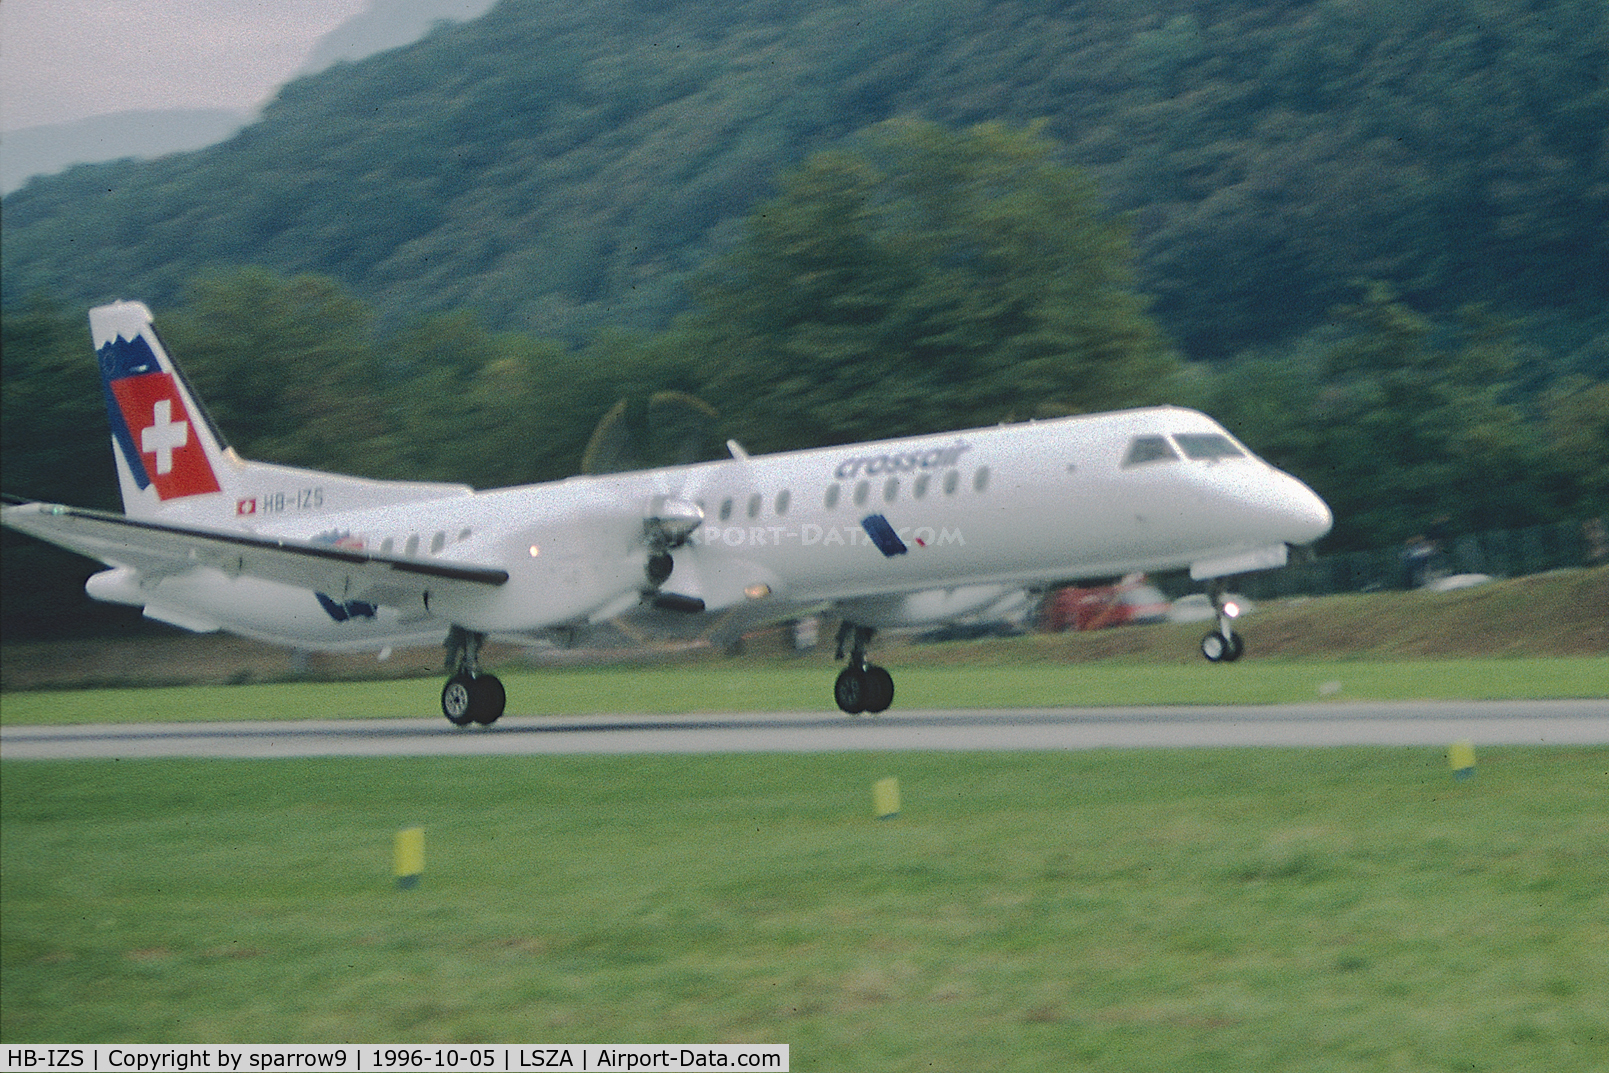 HB-IZS, 1996 Saab 2000 C/N 2000-035, Taking off from Lugano-Agno. Scanned from a slide.